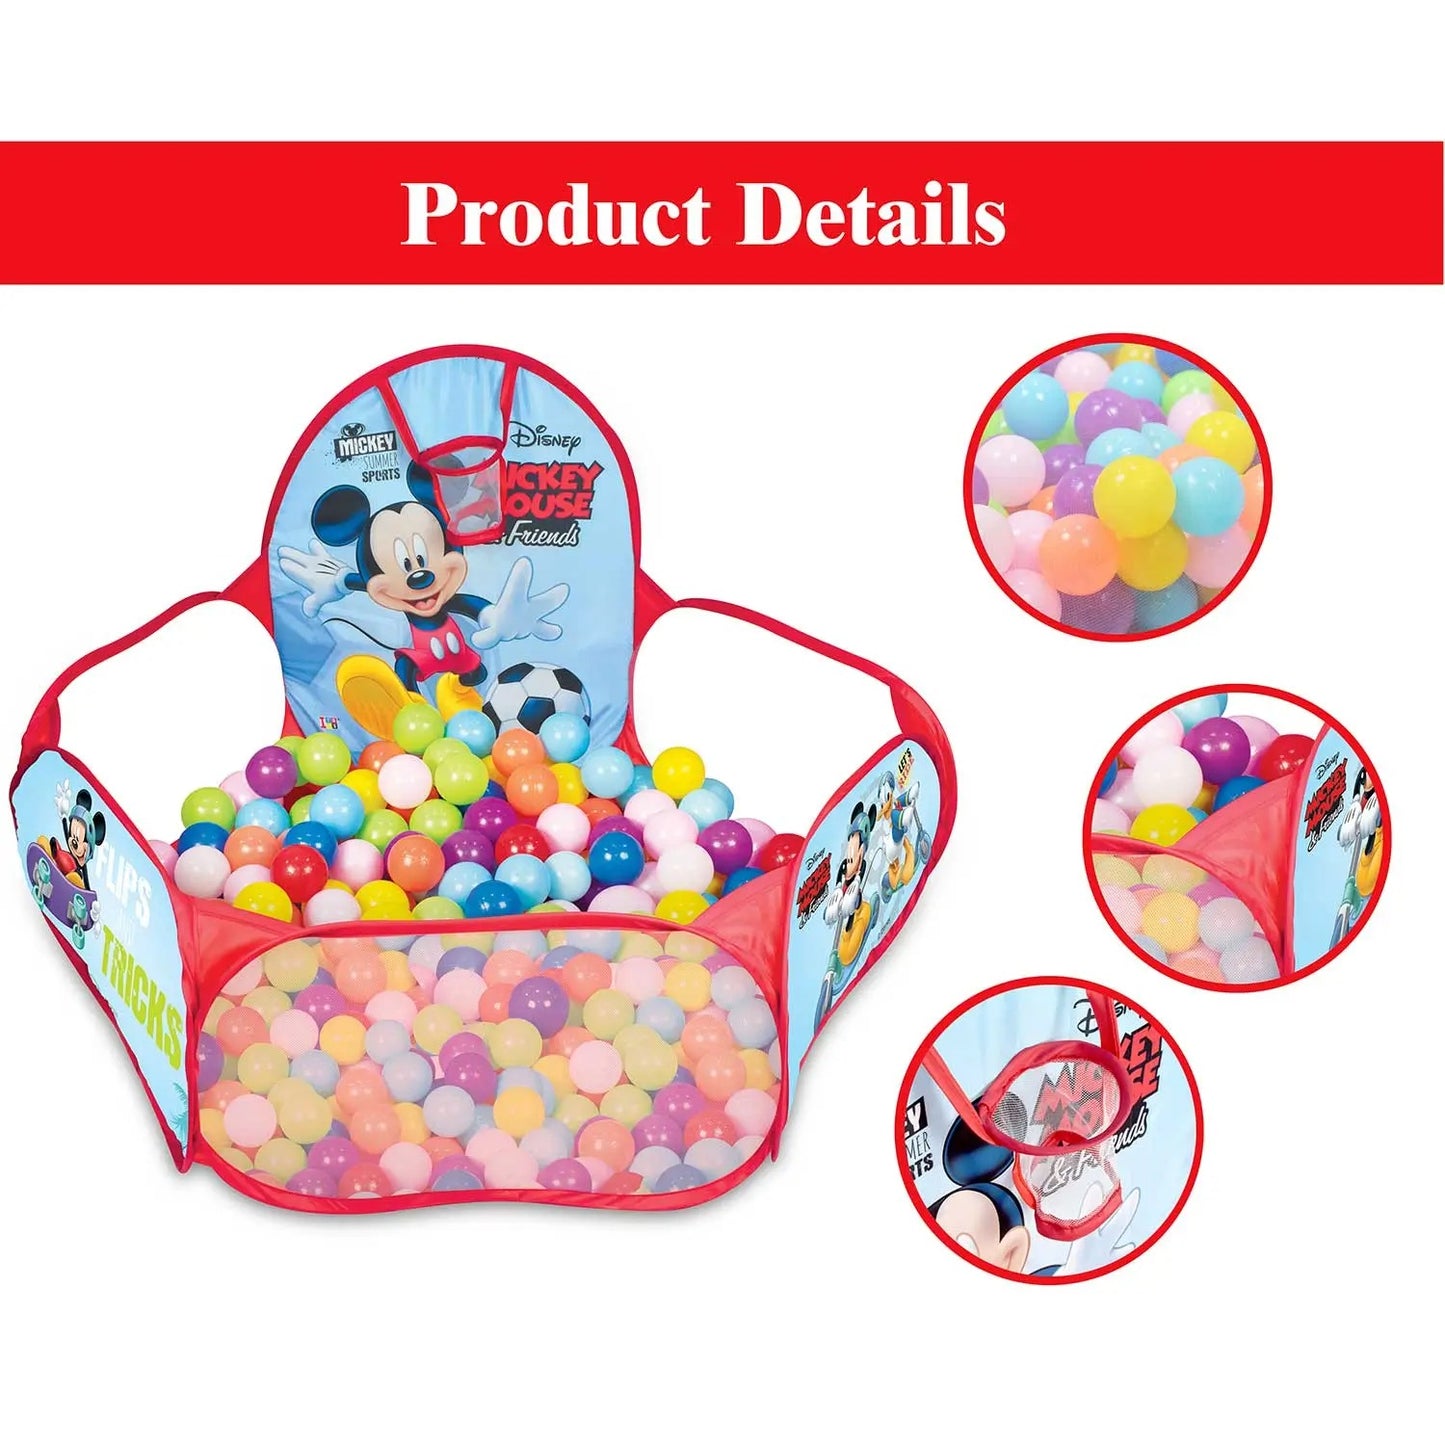 Theme Ball Pool with Multicolor Balls for Kids